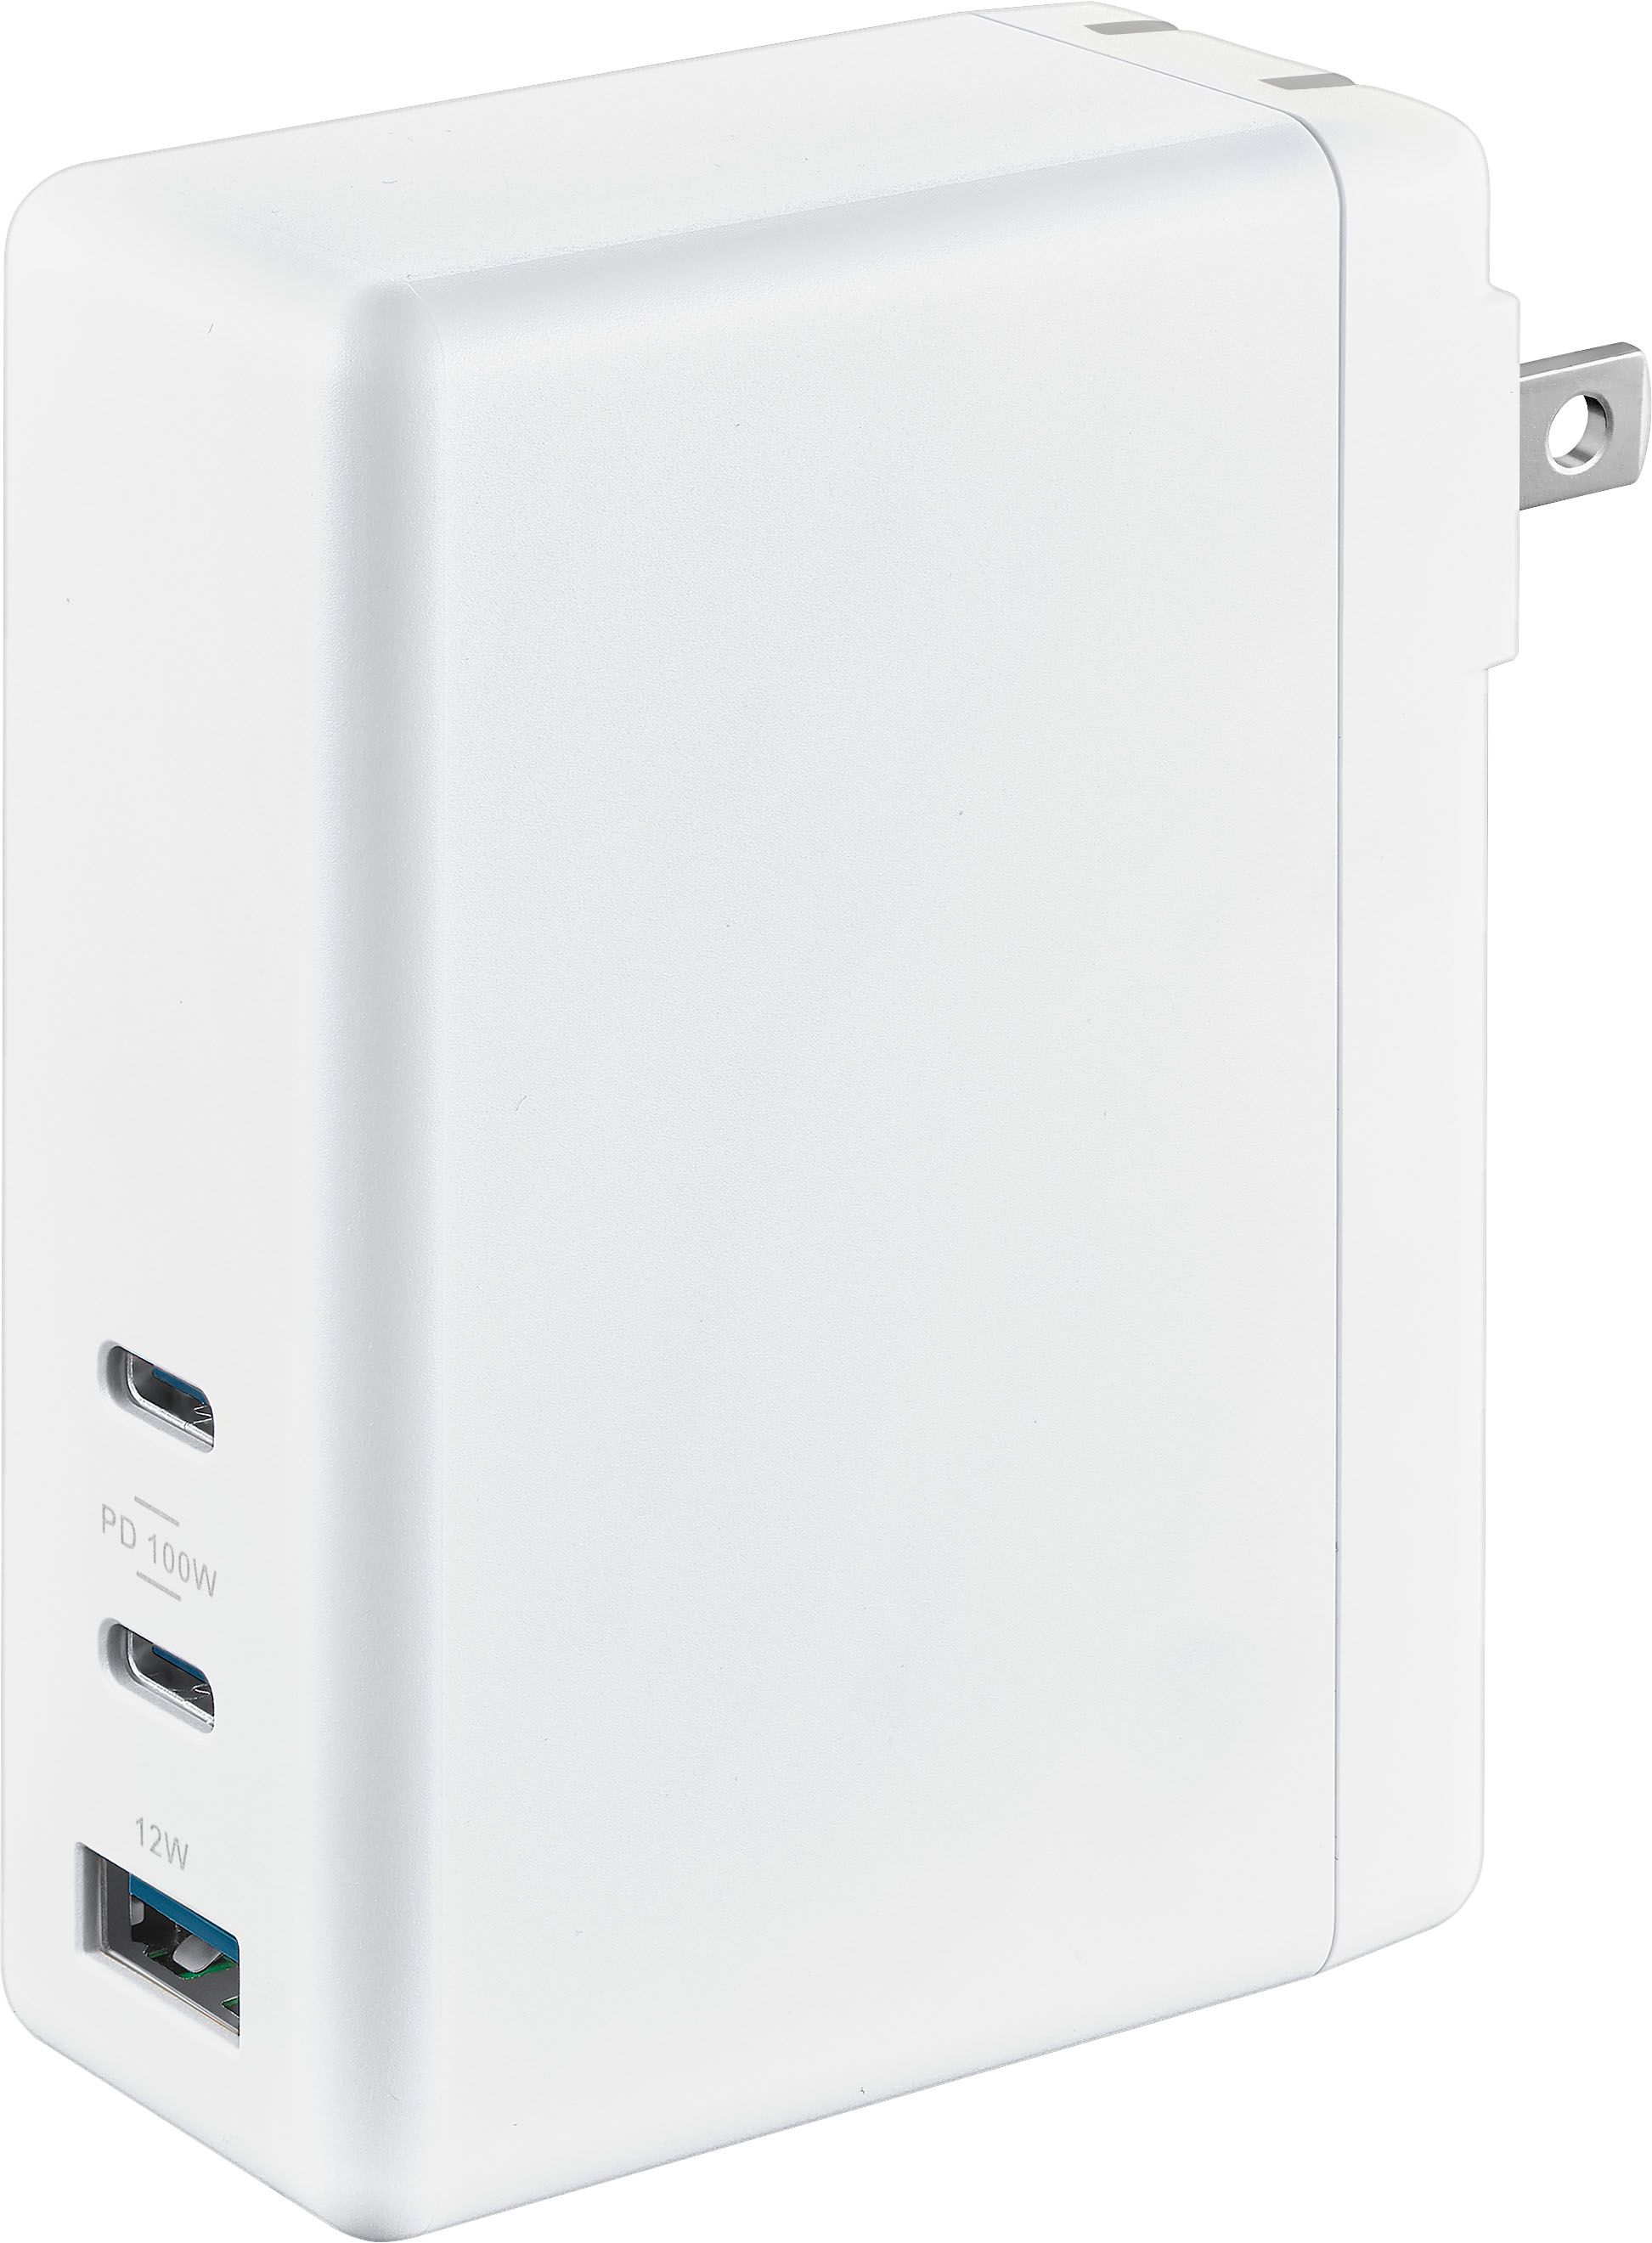 Anled view of the Insignia 112W Wall Charger showing two USB Type-C ports and one USB Type-A port